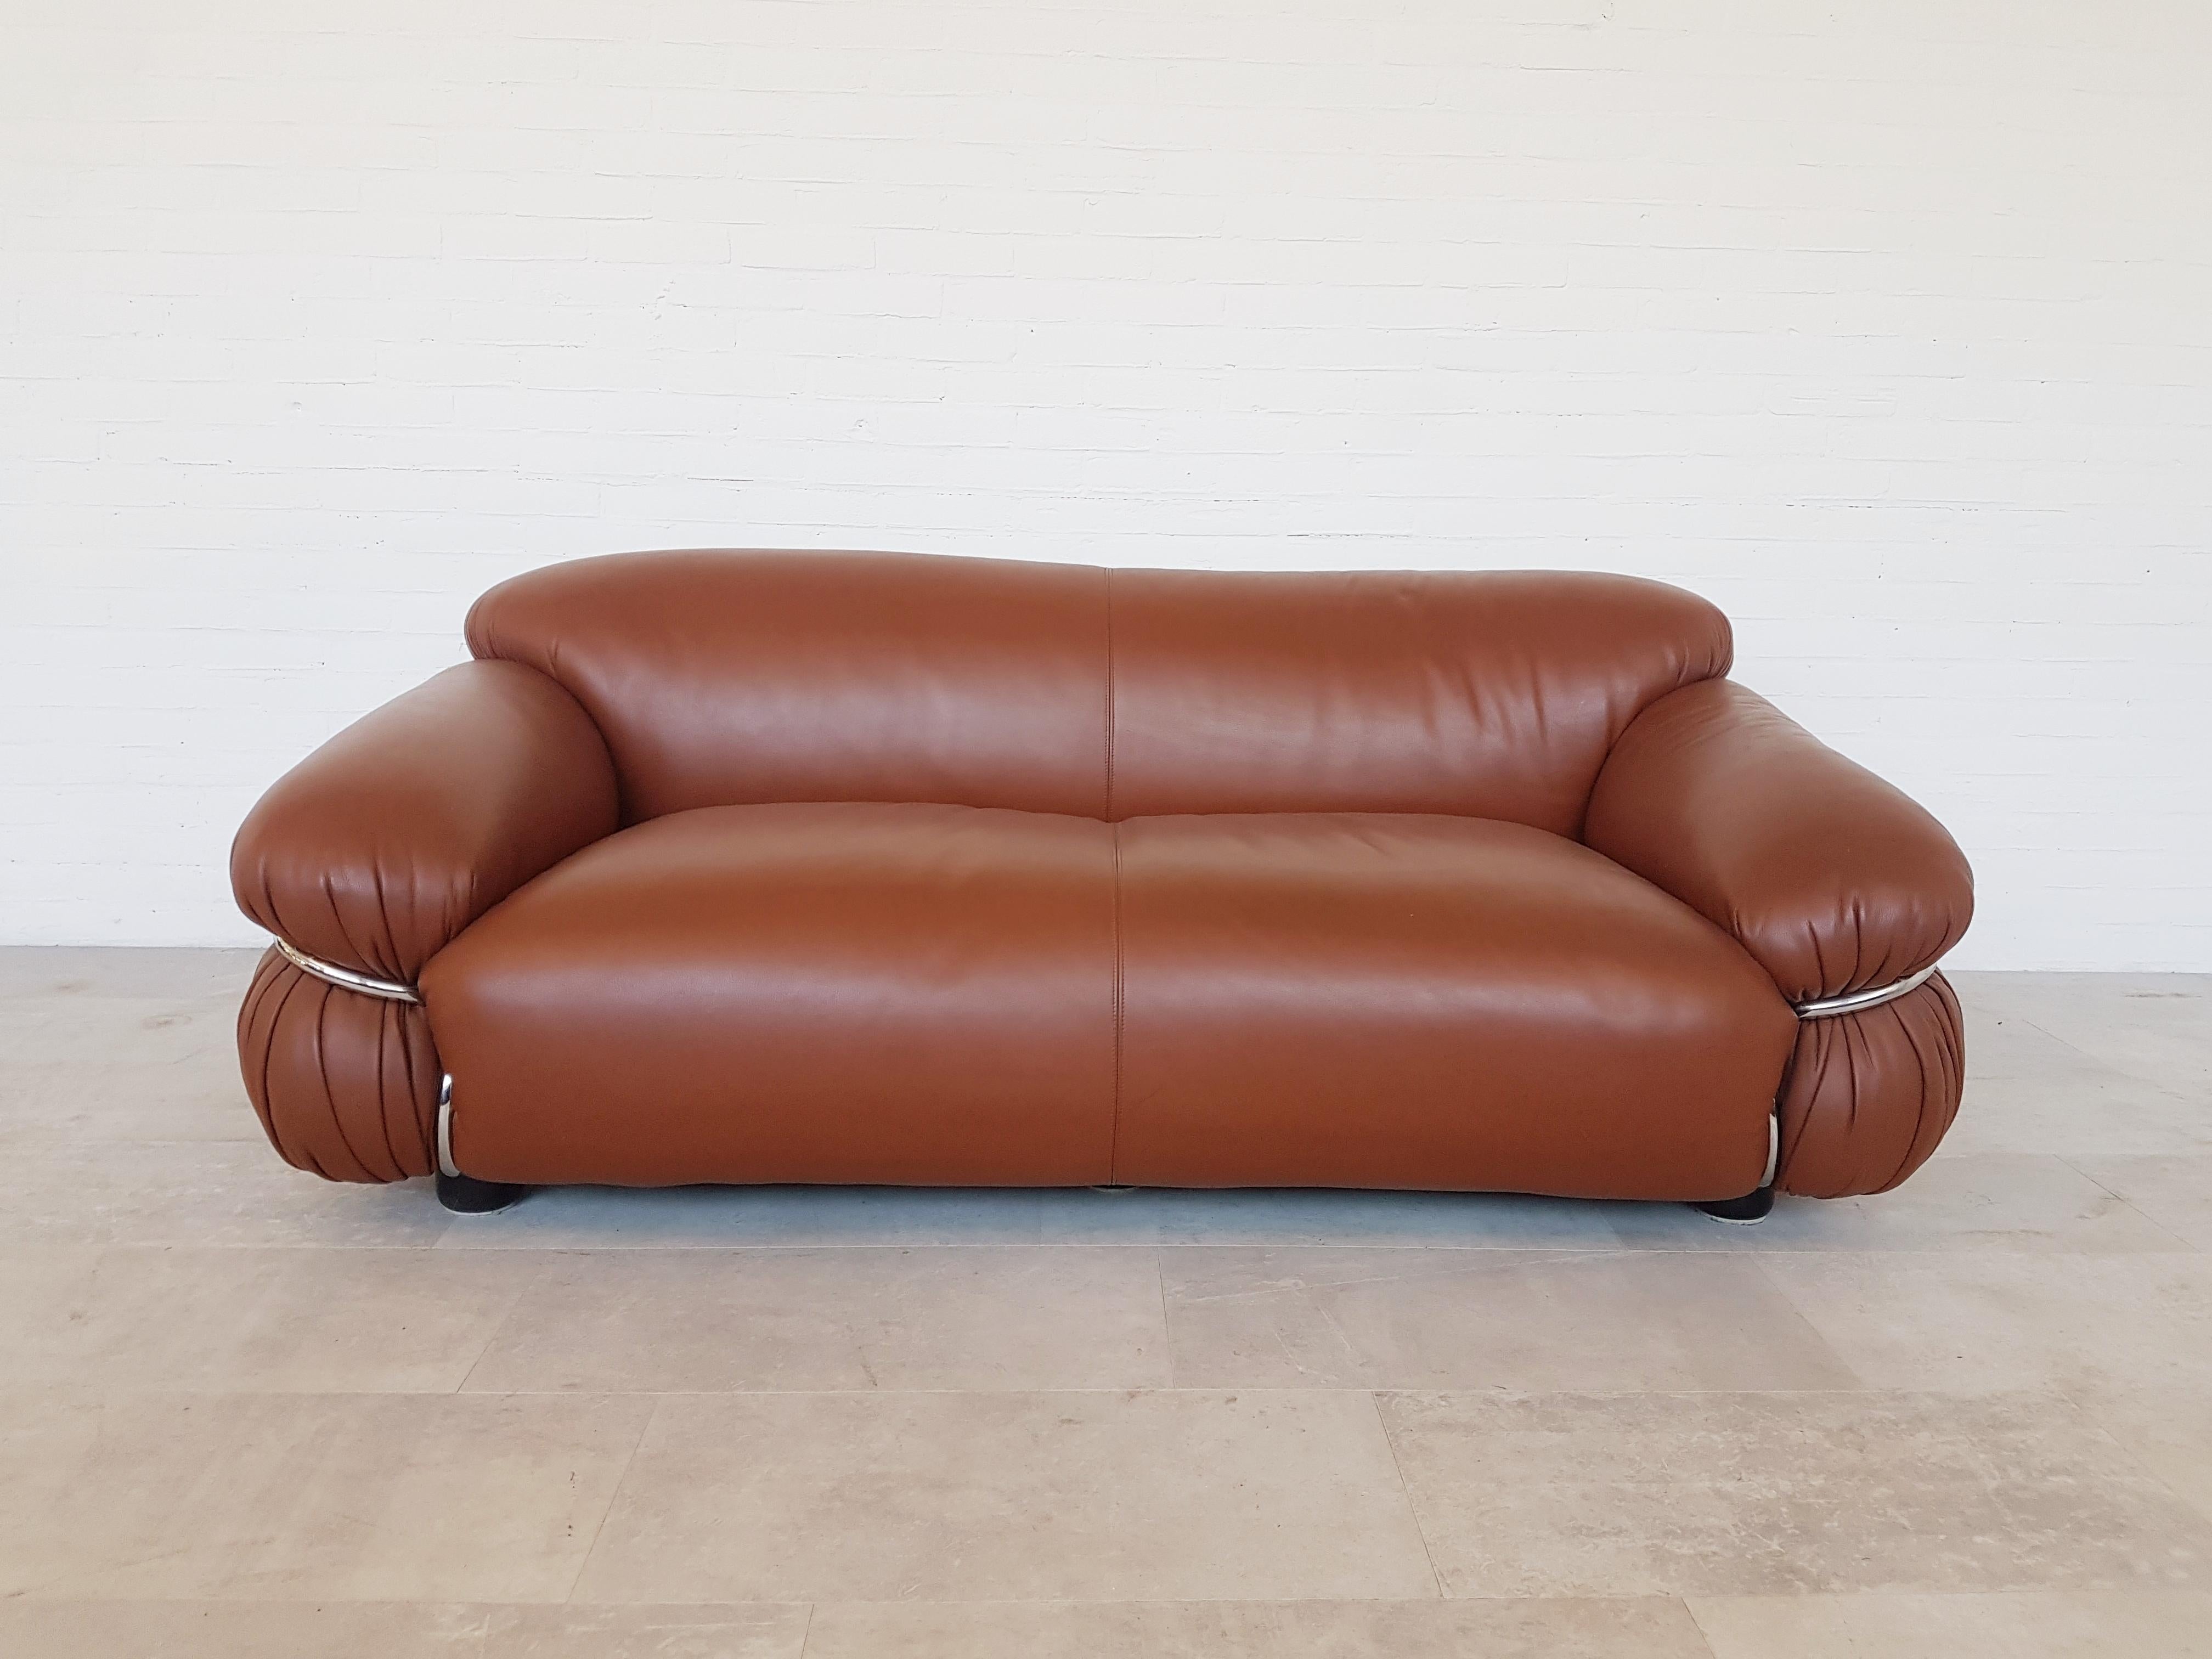 European Cassina 'Sesann' Two-Seat in Cognac Leather and Chrome